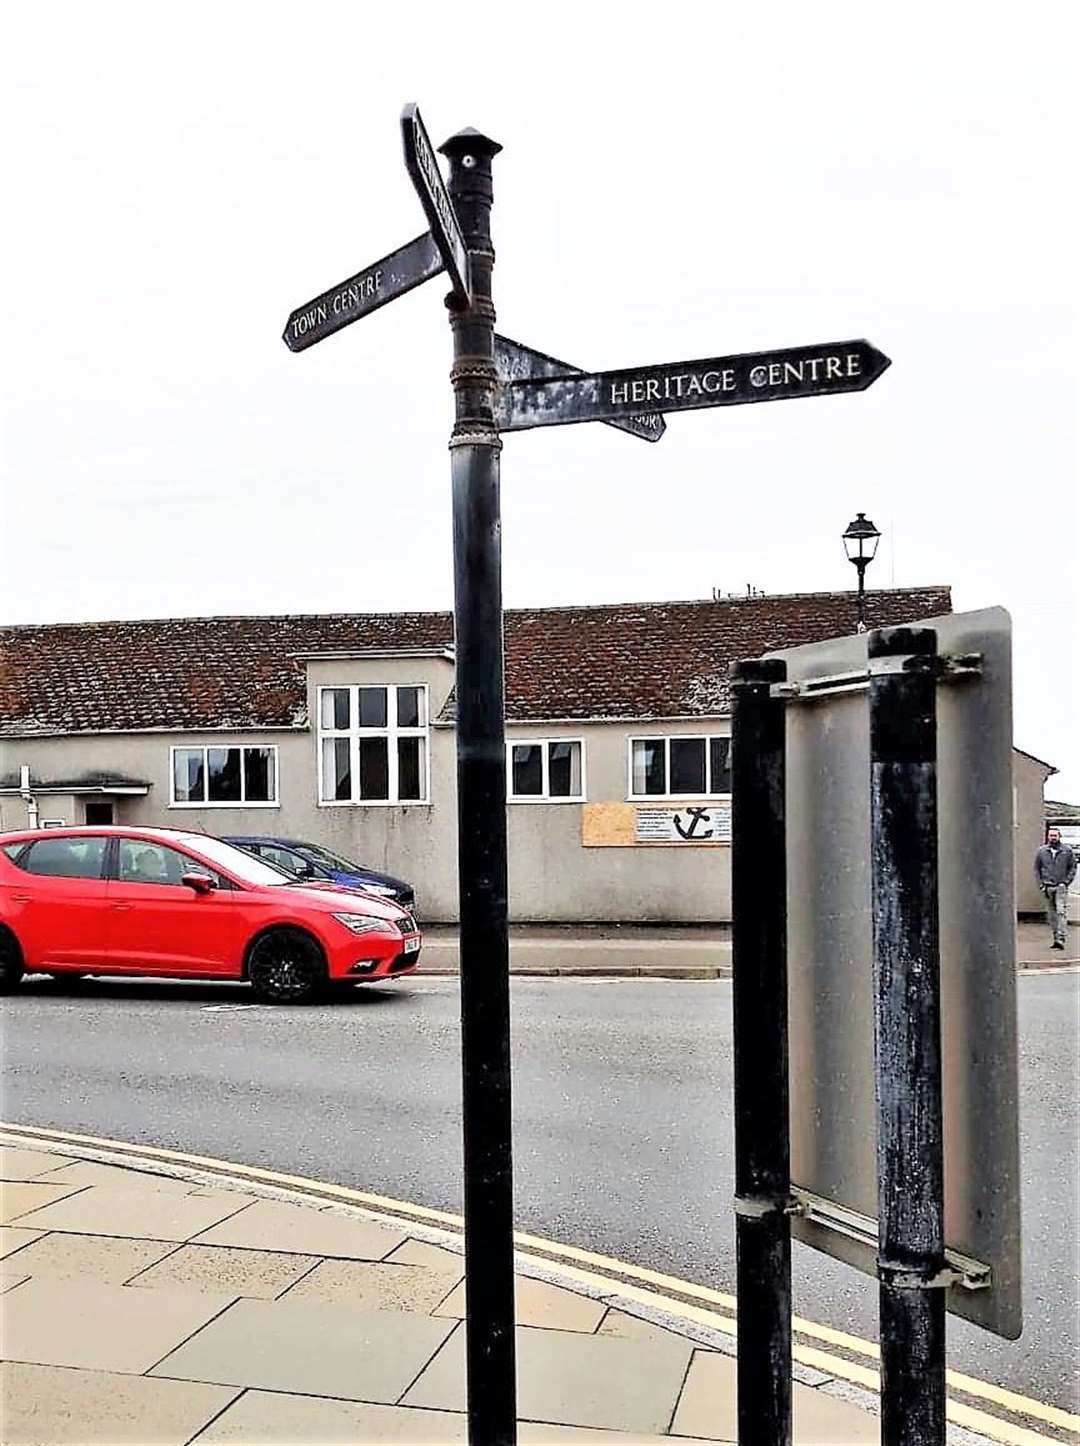 Grubby signposts will be painted in the planned programme of ancillary work to be carried out in late spring.